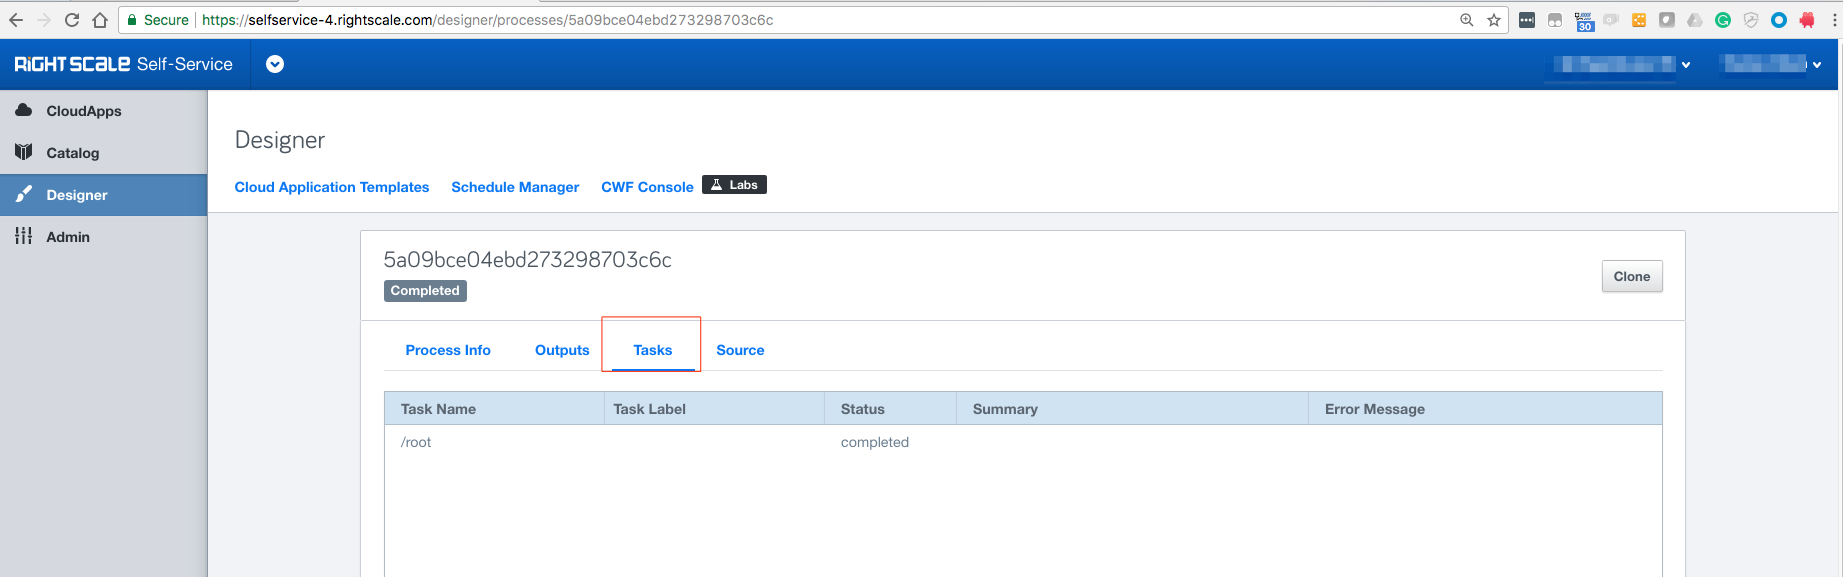 ss-cwf-console-example-3-cloud-lookup-tasks-4.png